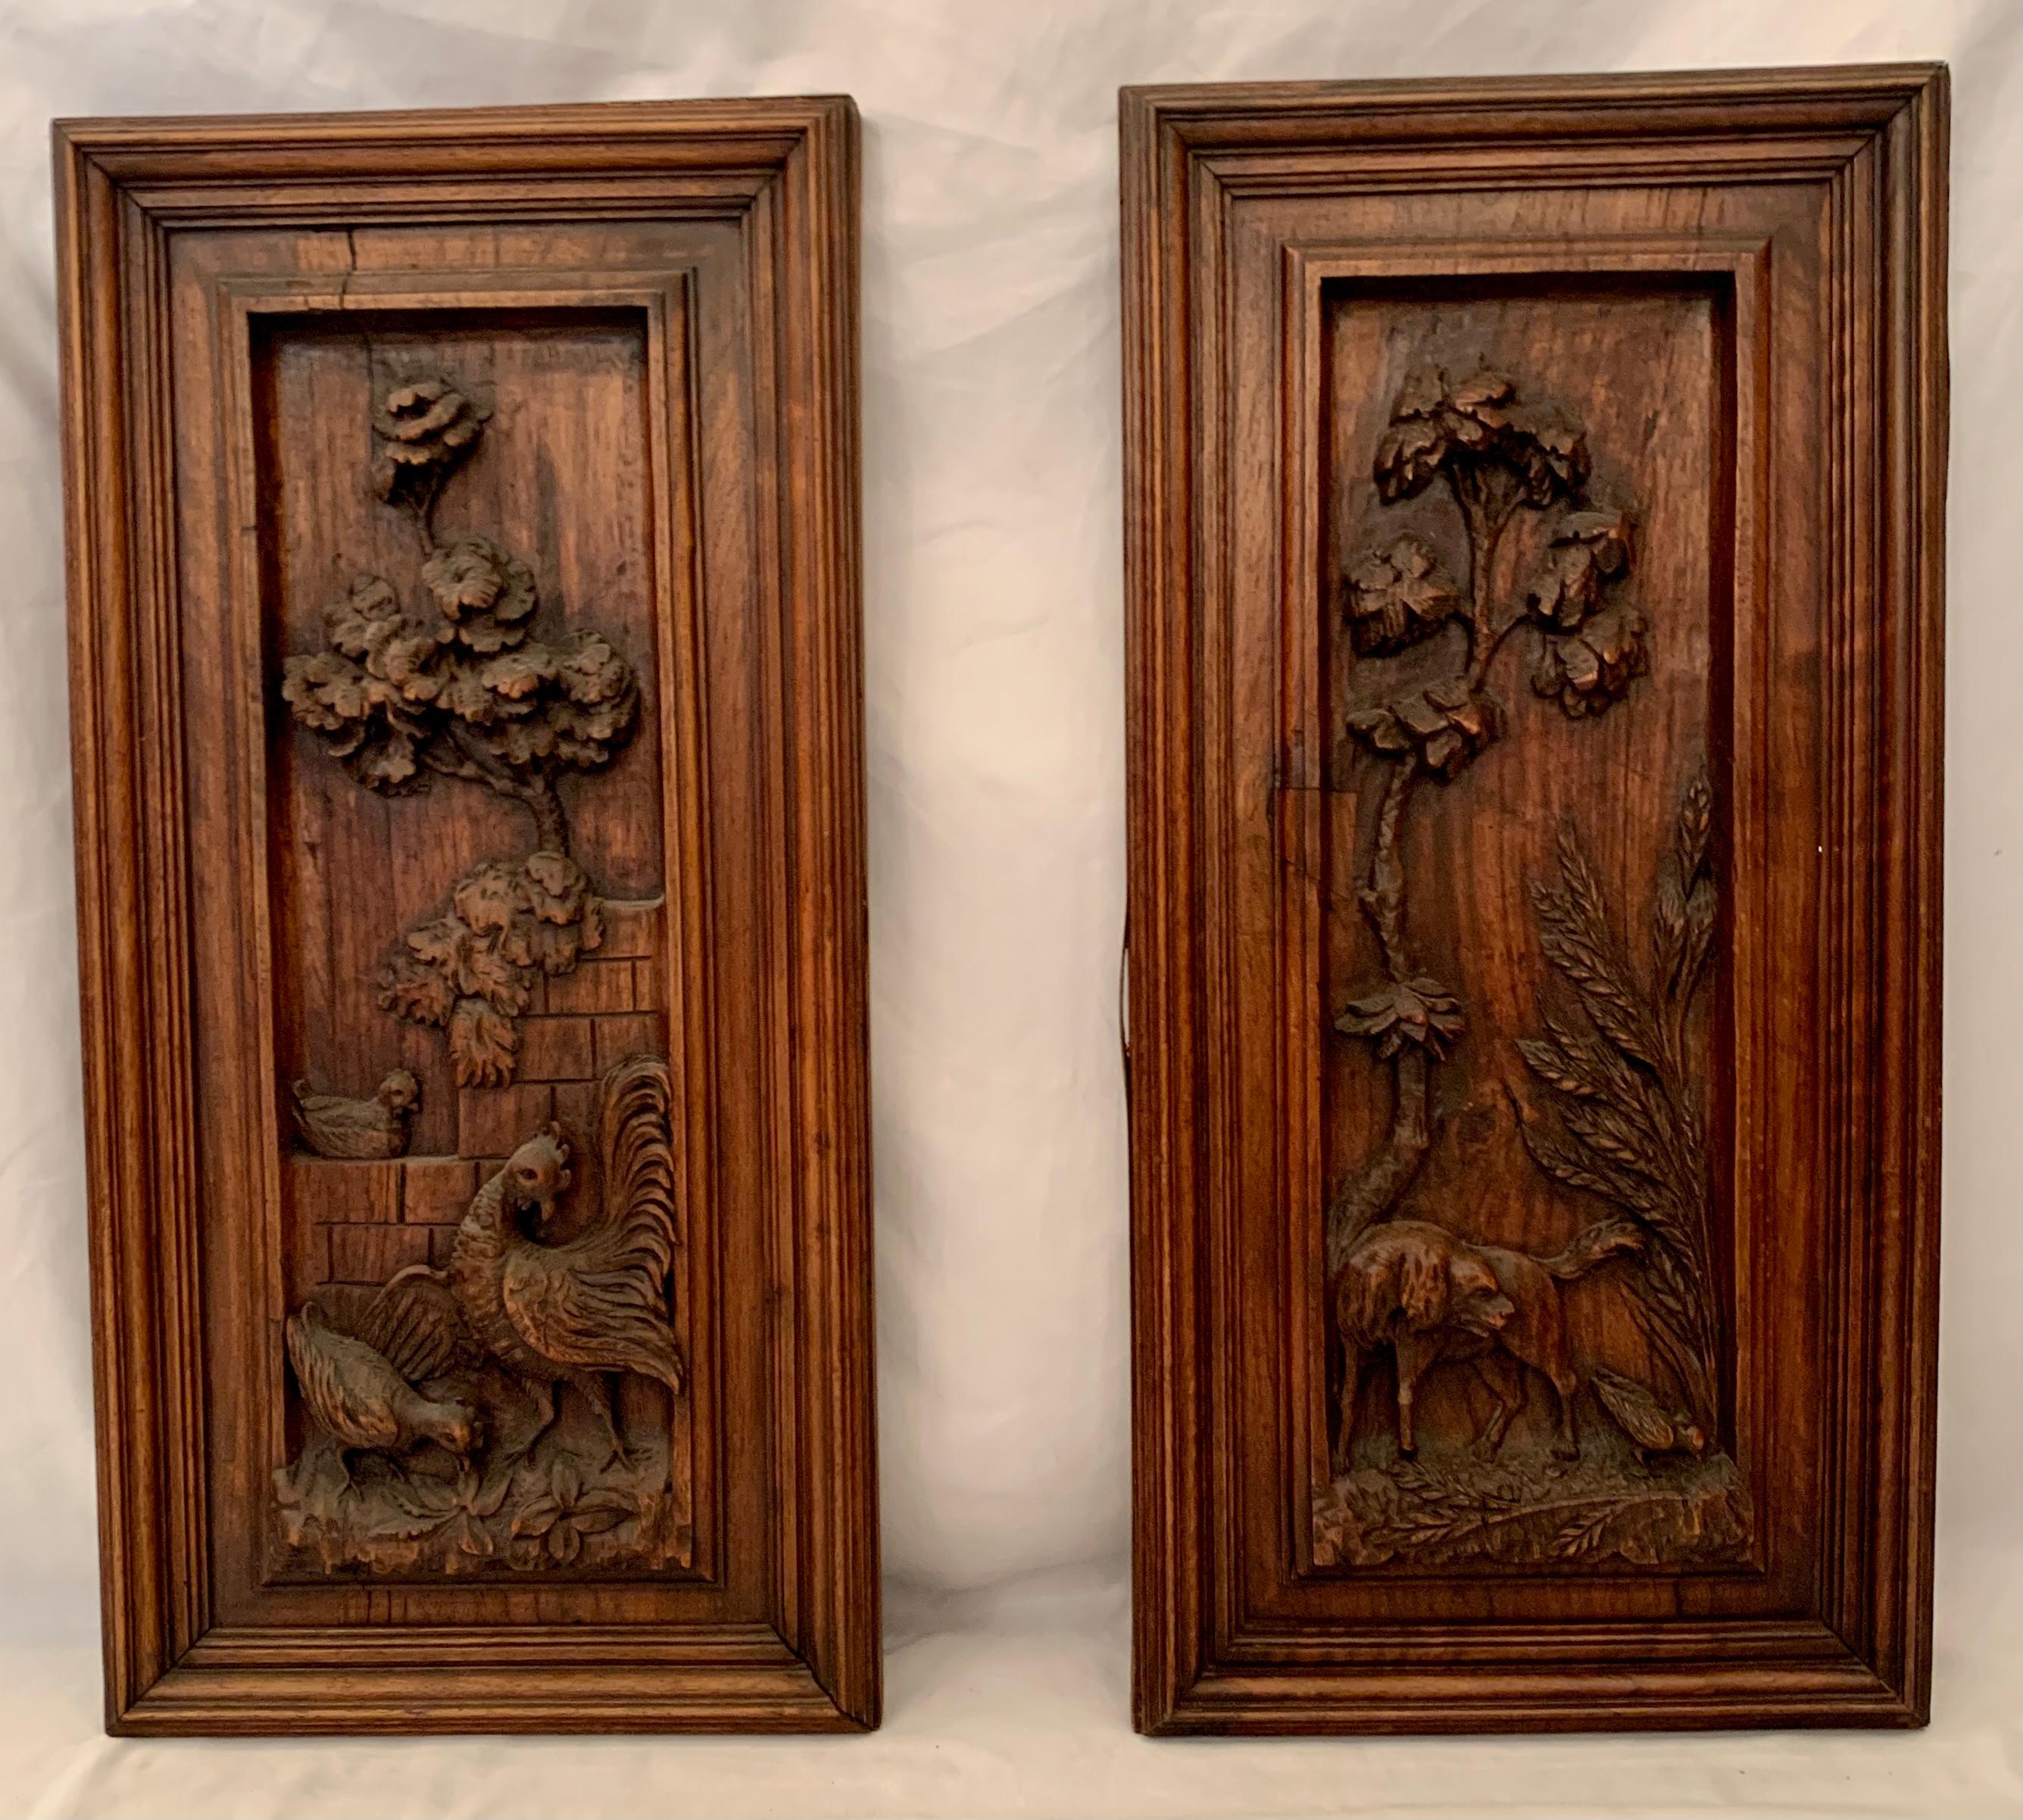 Pair Antique French Provincial Carved Walnut Wall Plaques, Circa 1890-1900